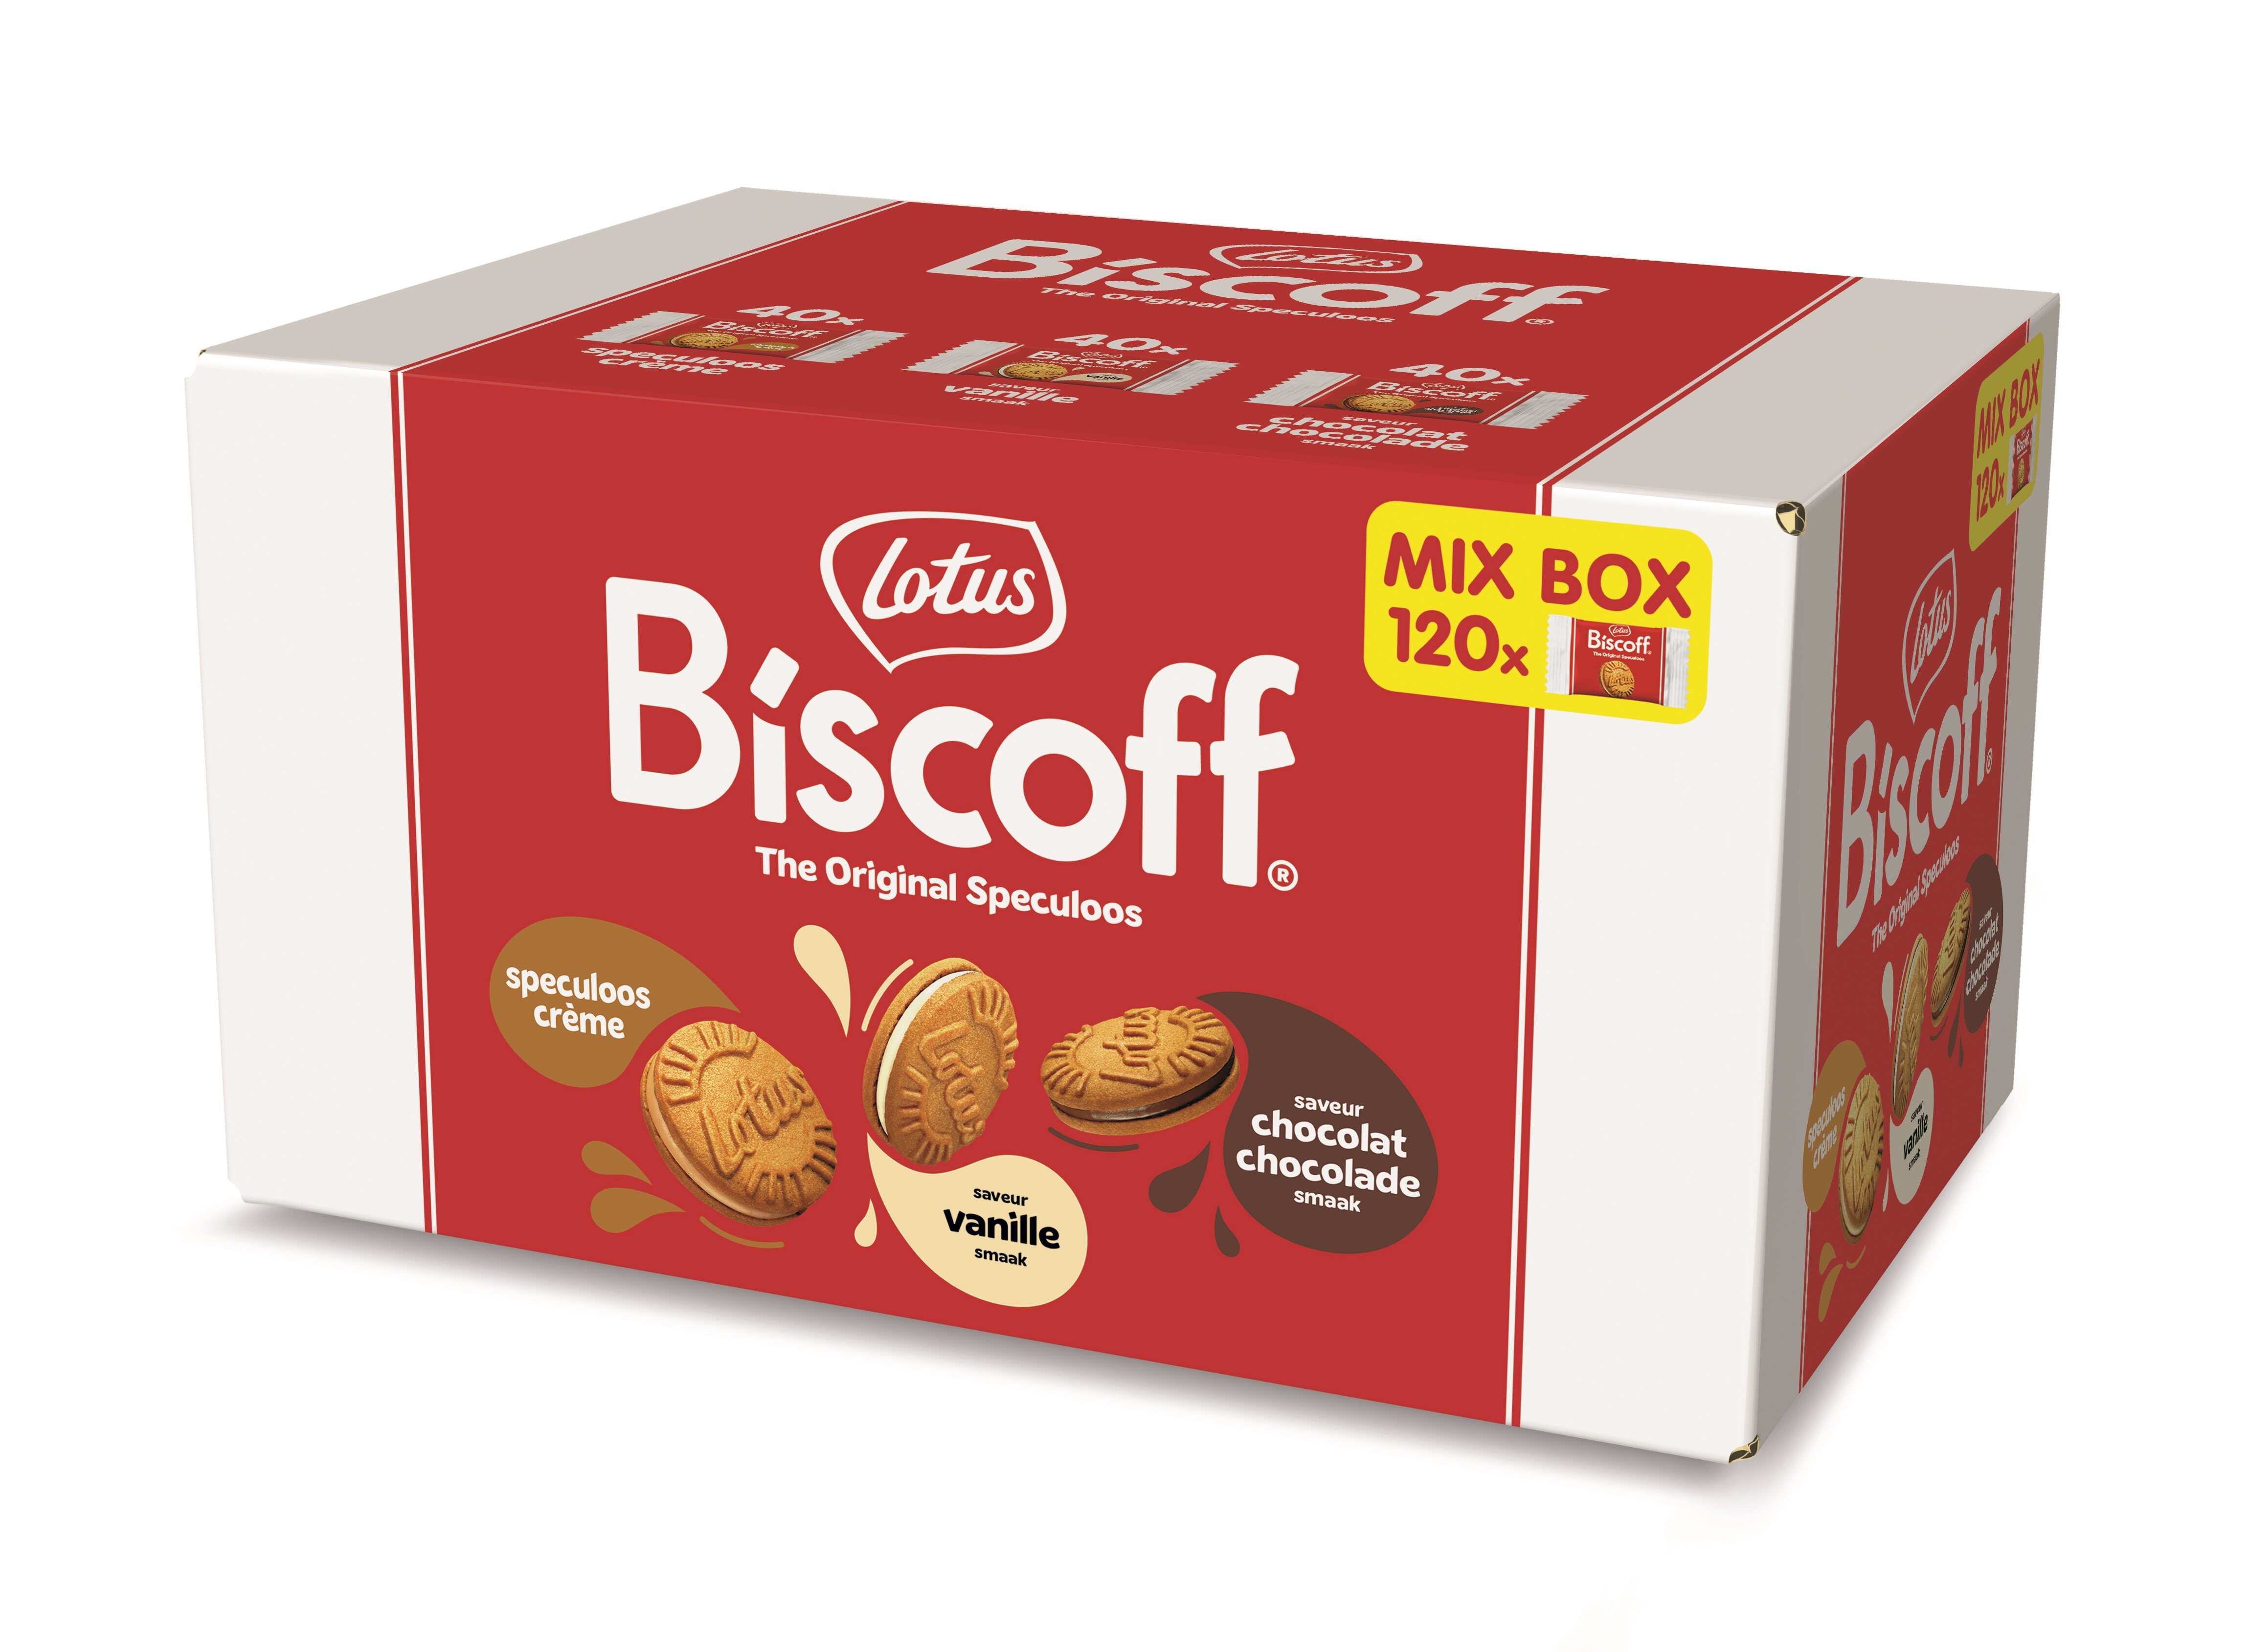 Lotus Biscoff Mix Box Sandwich Biscuits 120pcs individually wrapped